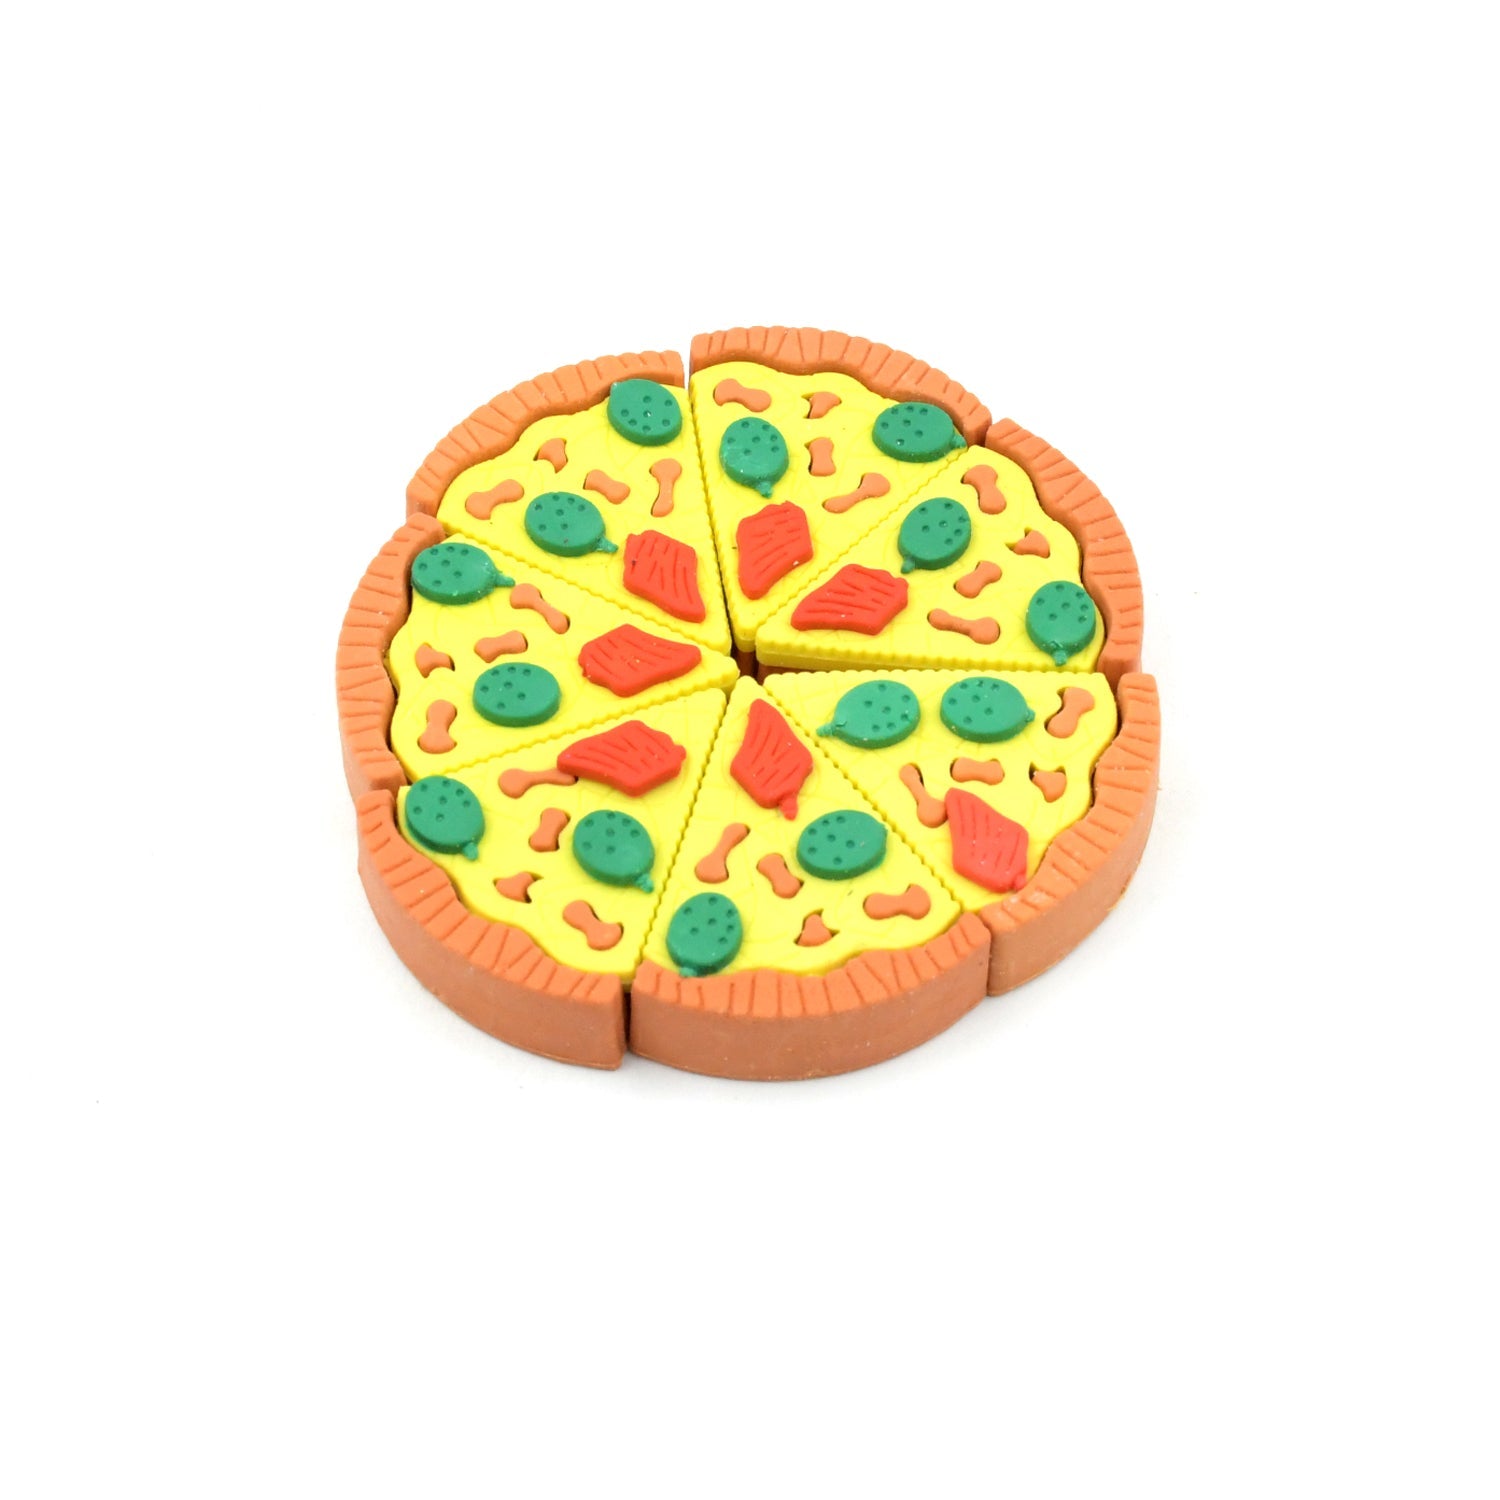 4347 3D Pizza Slices Kids Favourite Food Eraser, Pizza 7 slice eraser for kids Adults fast food lover Stationary Kit Fancy & Stylish Colorful Erasers, for Return Gift, Birthday Party, School Prize